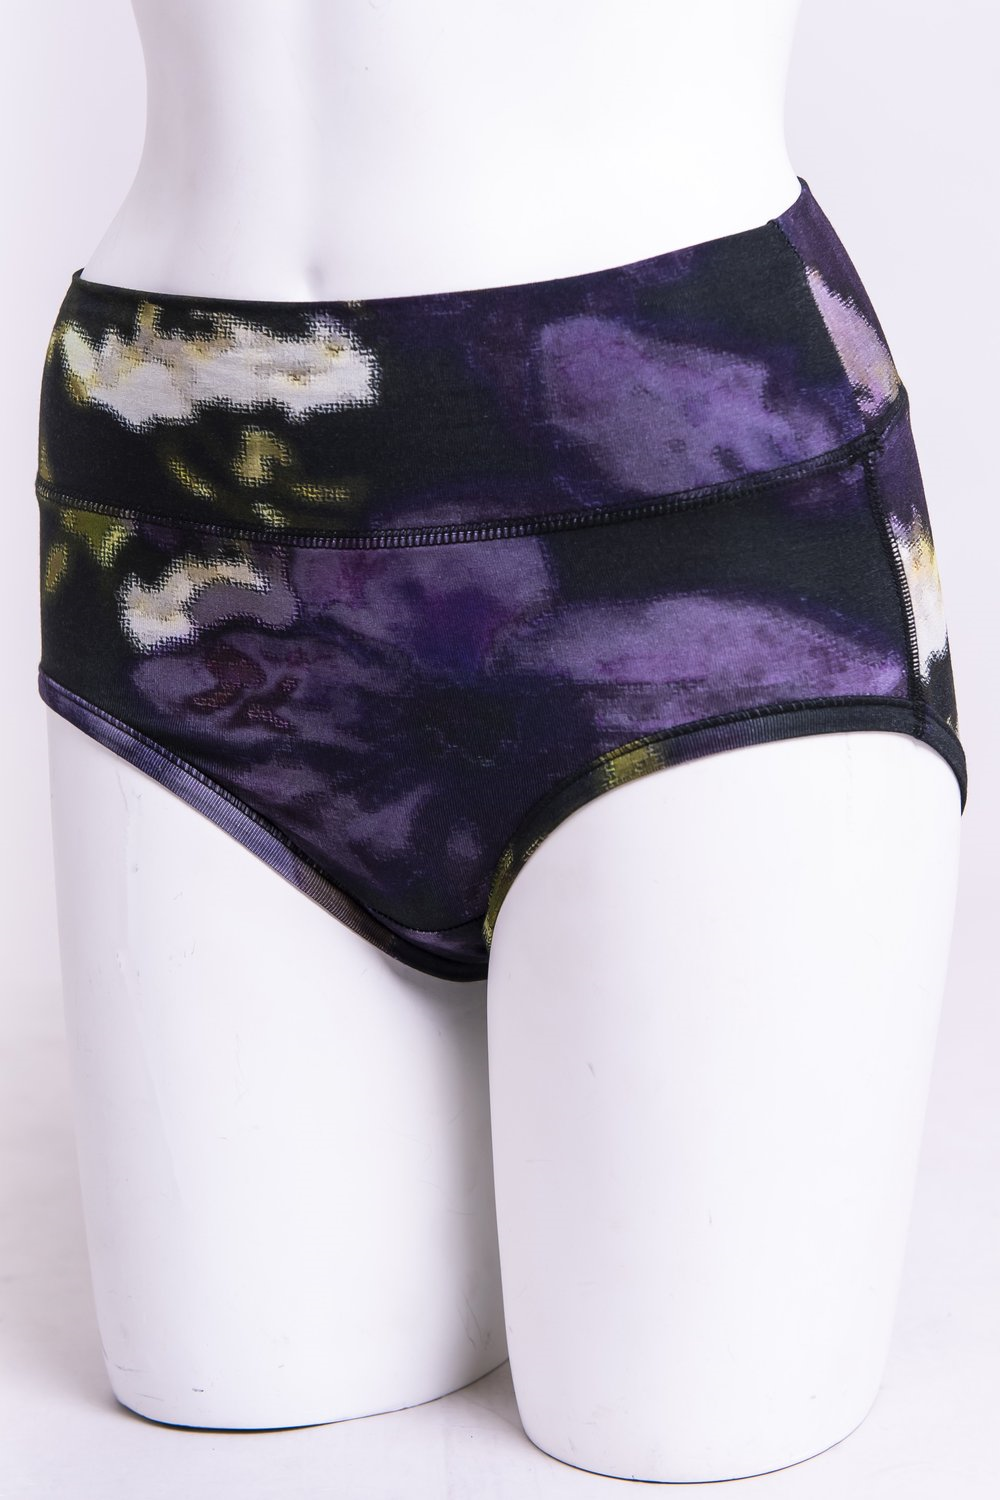   La Gaunche is shaped to be lightly horizontal, tucking snugly under the buttocks. Out of sight, out of mind.    Fabrication: BAMBOO - 95% Bamboo 5% Lycra   Fabrication - BAMBOO MODAL -50% Bamboo 42% Modal 8% Lycra  BLUE SKY $15.00 colour Clemantis print